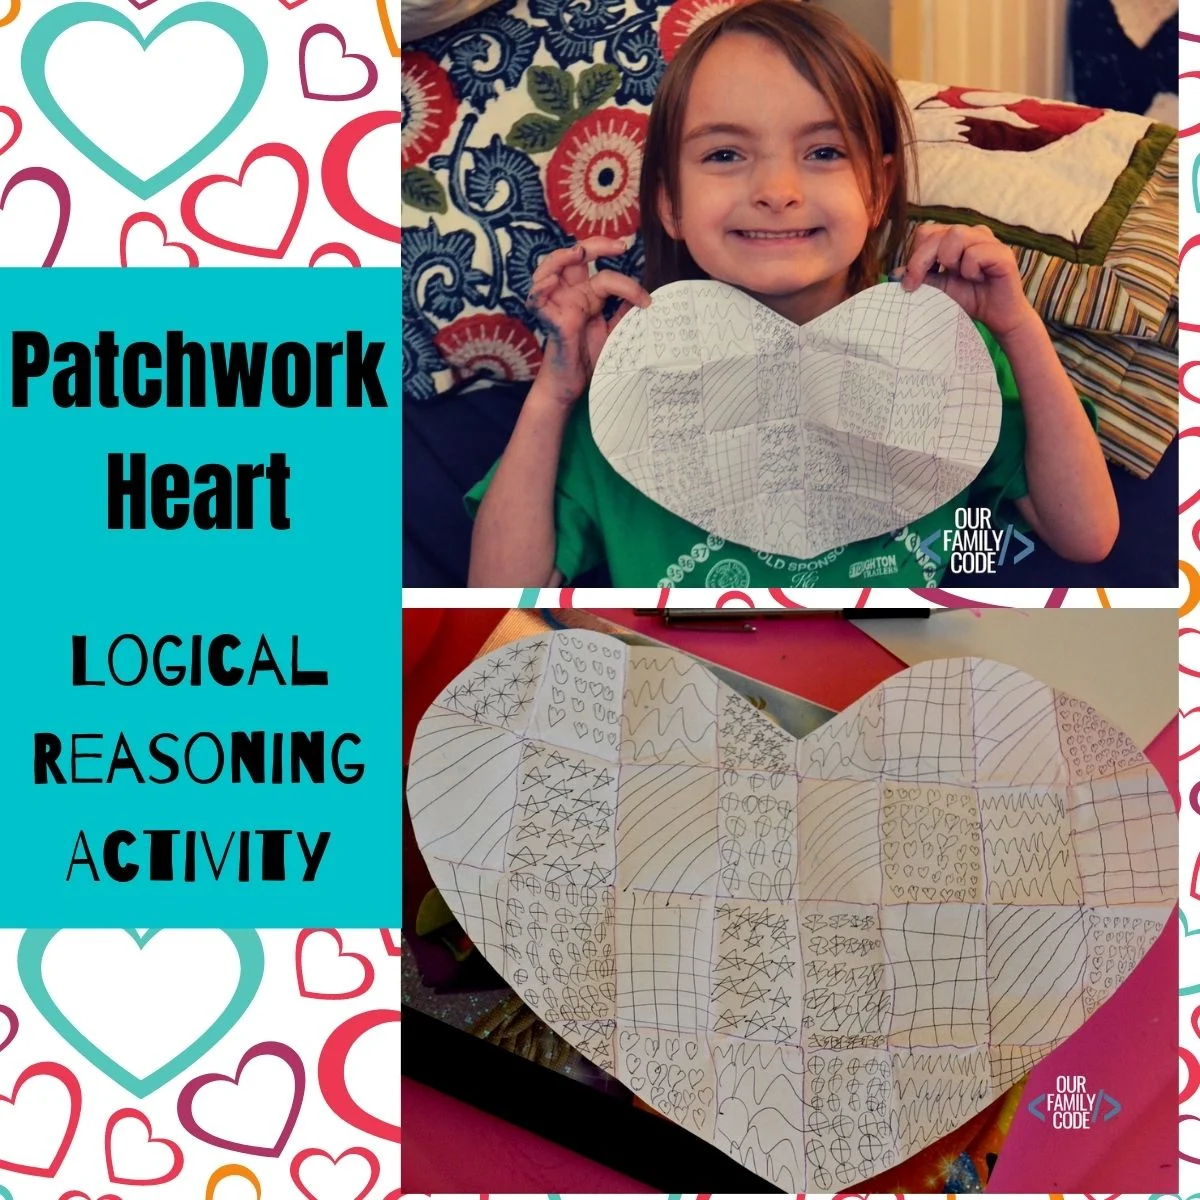 logical reasoning patchwork heart activity